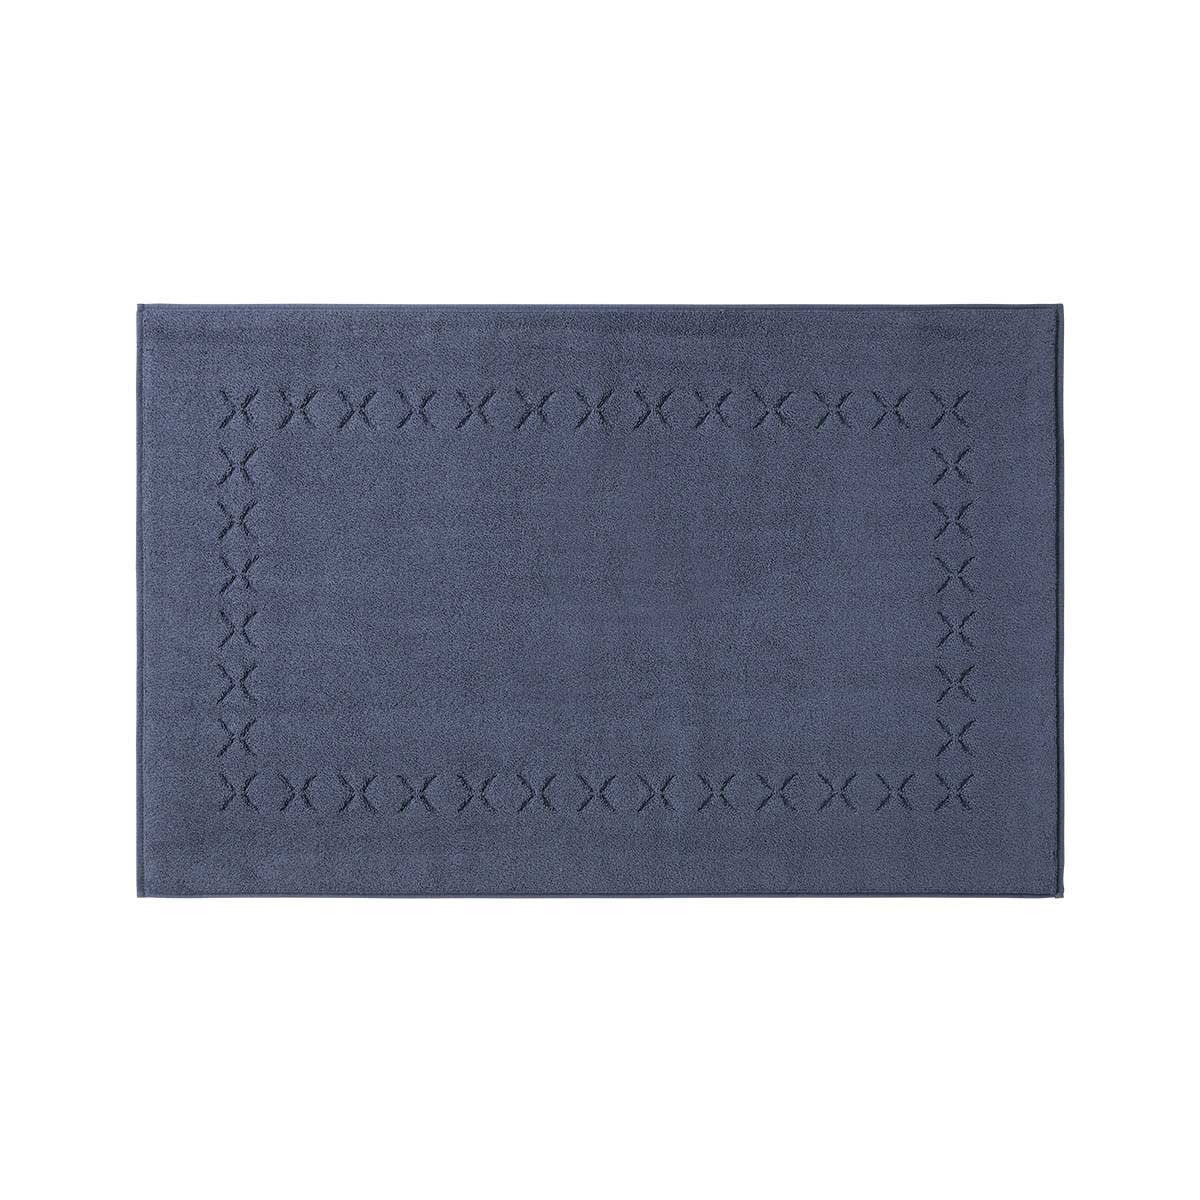 Yves Delorme Nature Bath Towels and Mats - Outremer